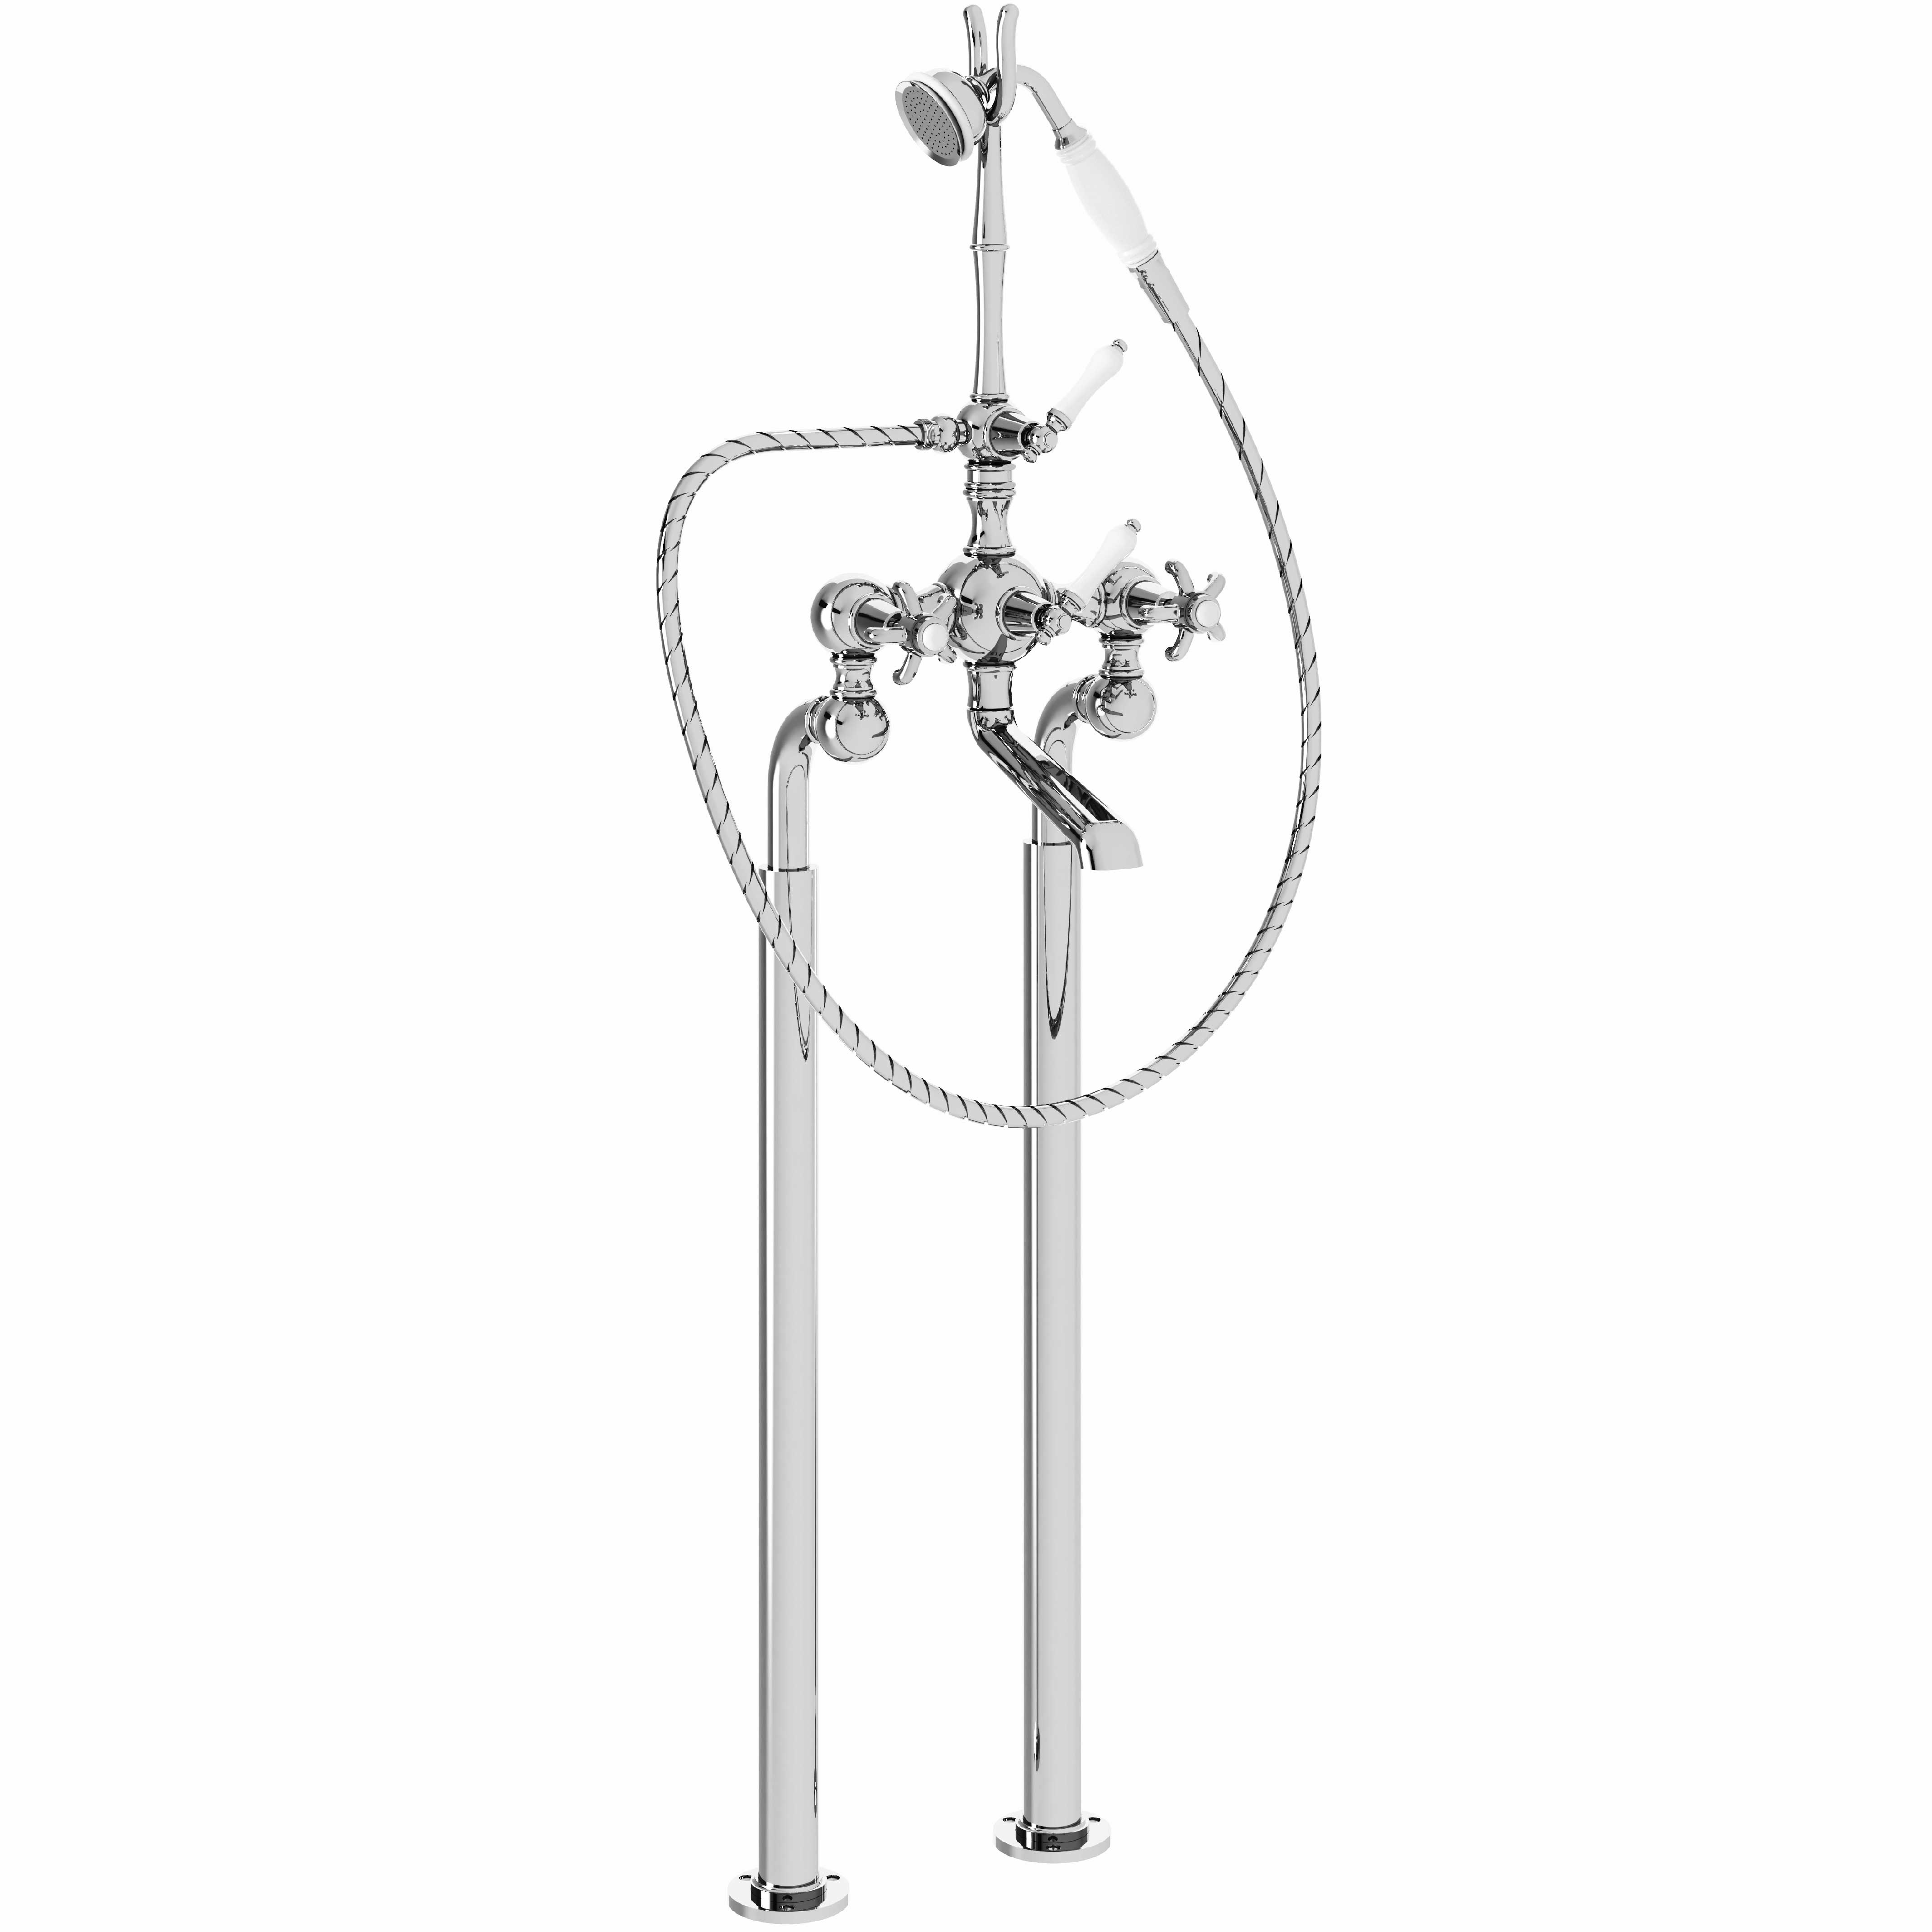 M01-3309 Floor mounted bath and shower mixer